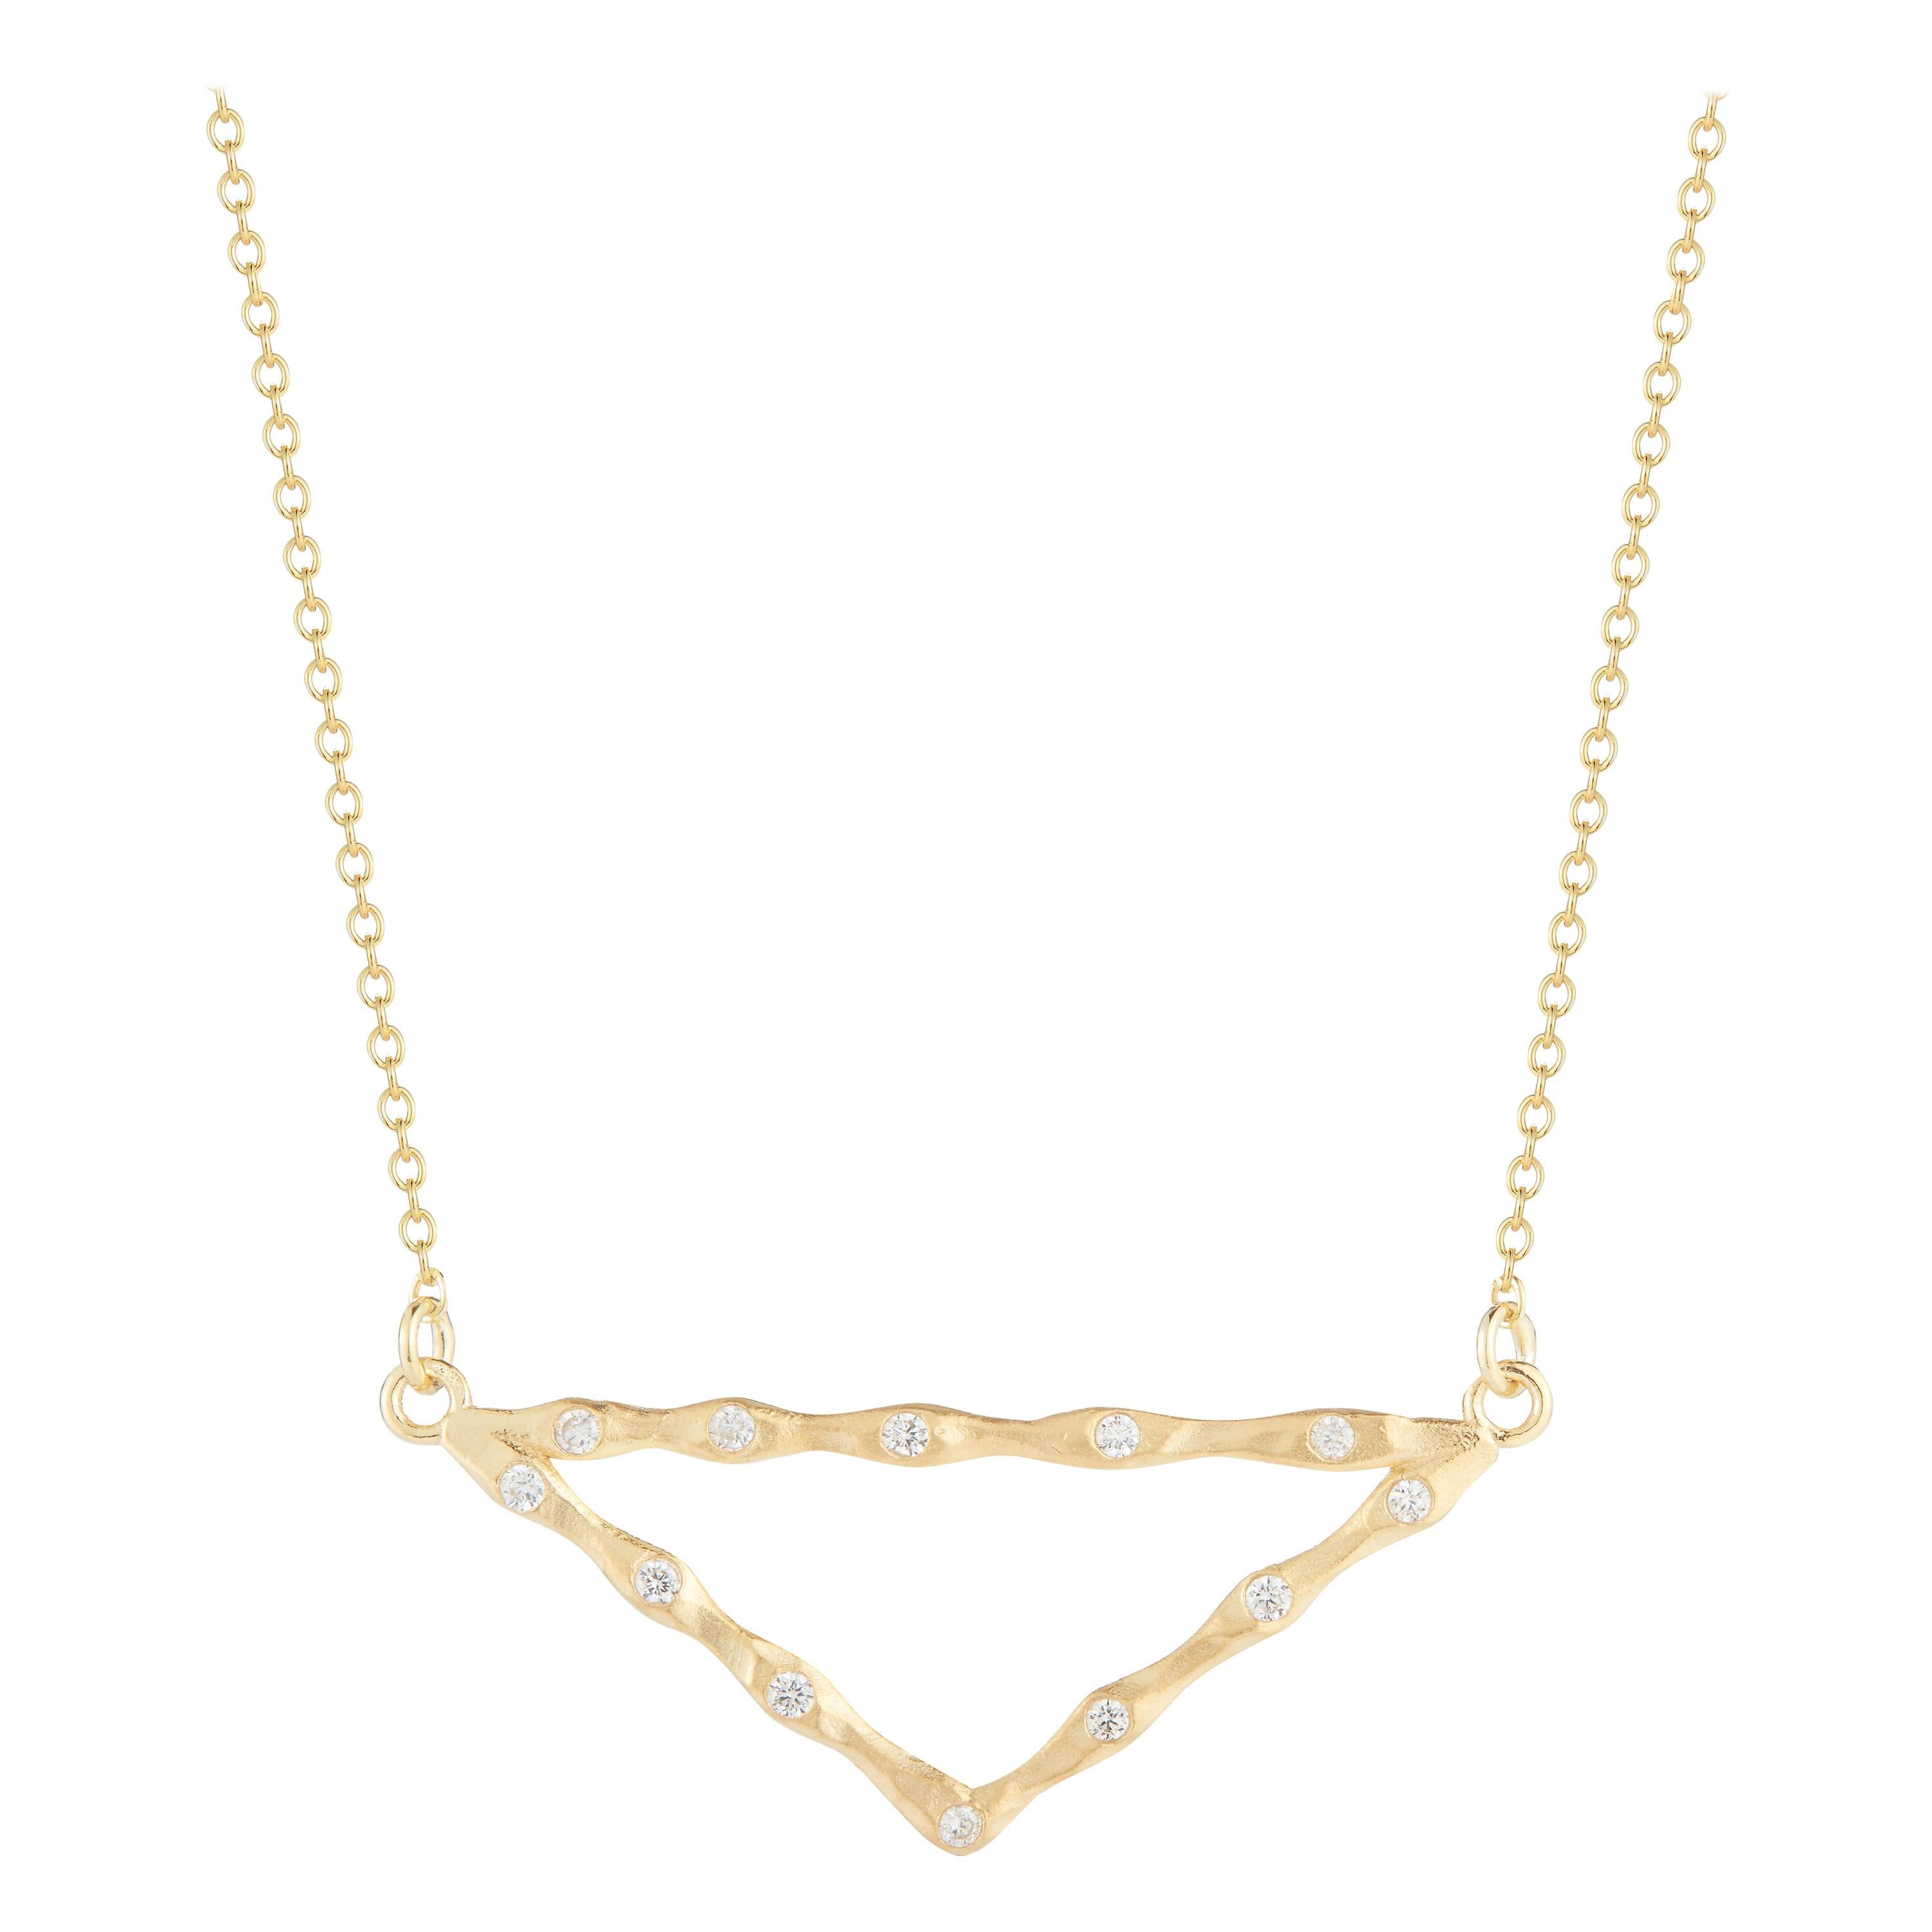 Handcrafted 14 Karat East-to-West Open Triangle Pendant